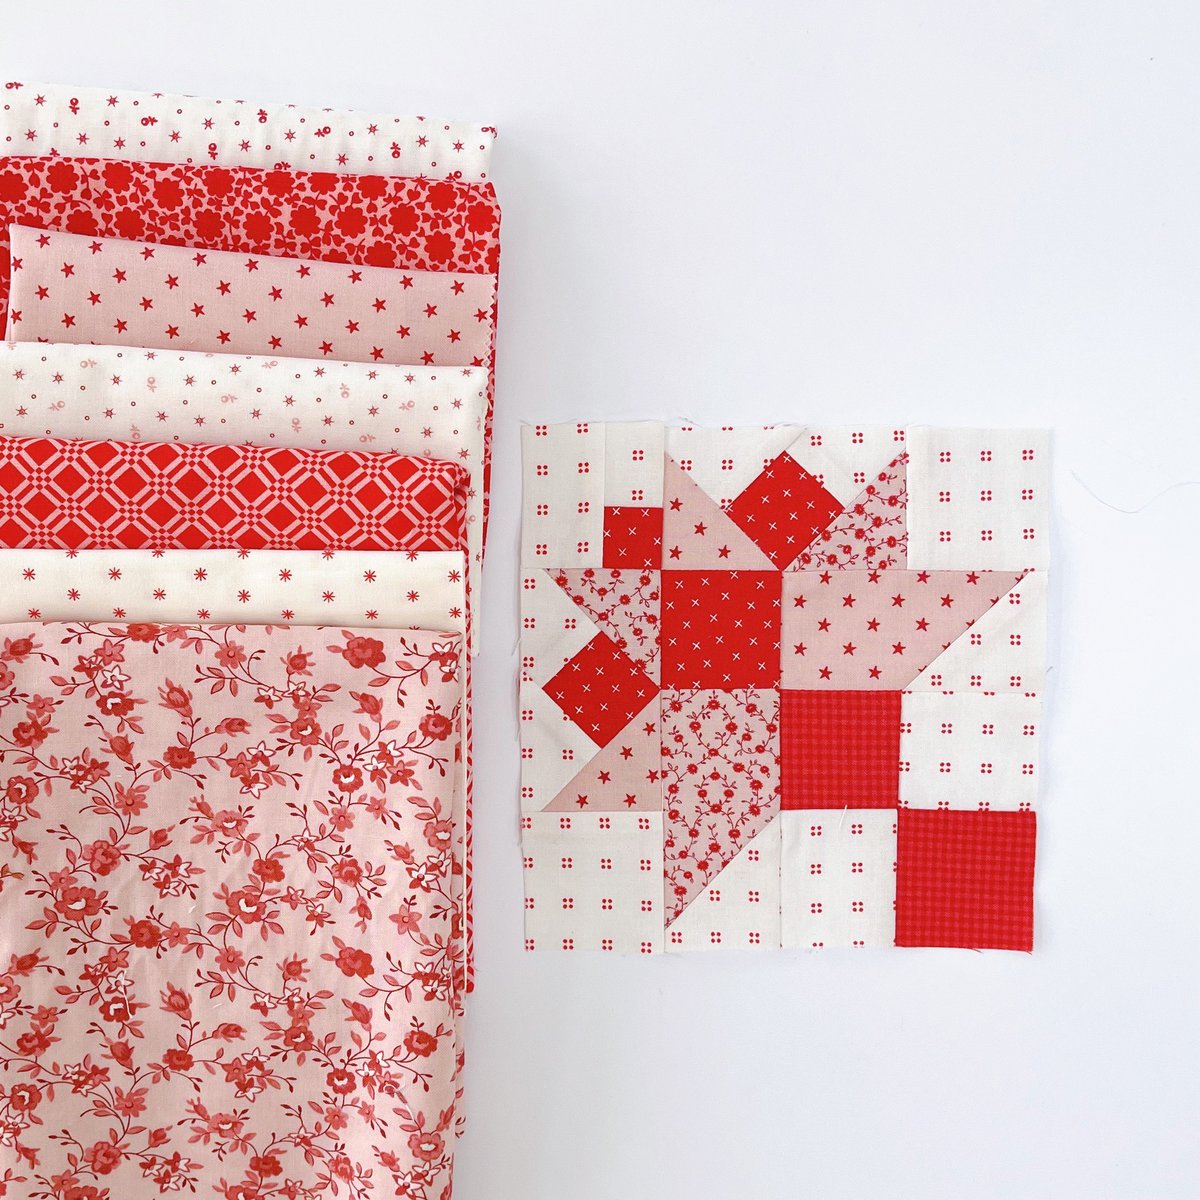 Susan Ache's Tussy Mussy Blocks for the first release of Sewcialites 2